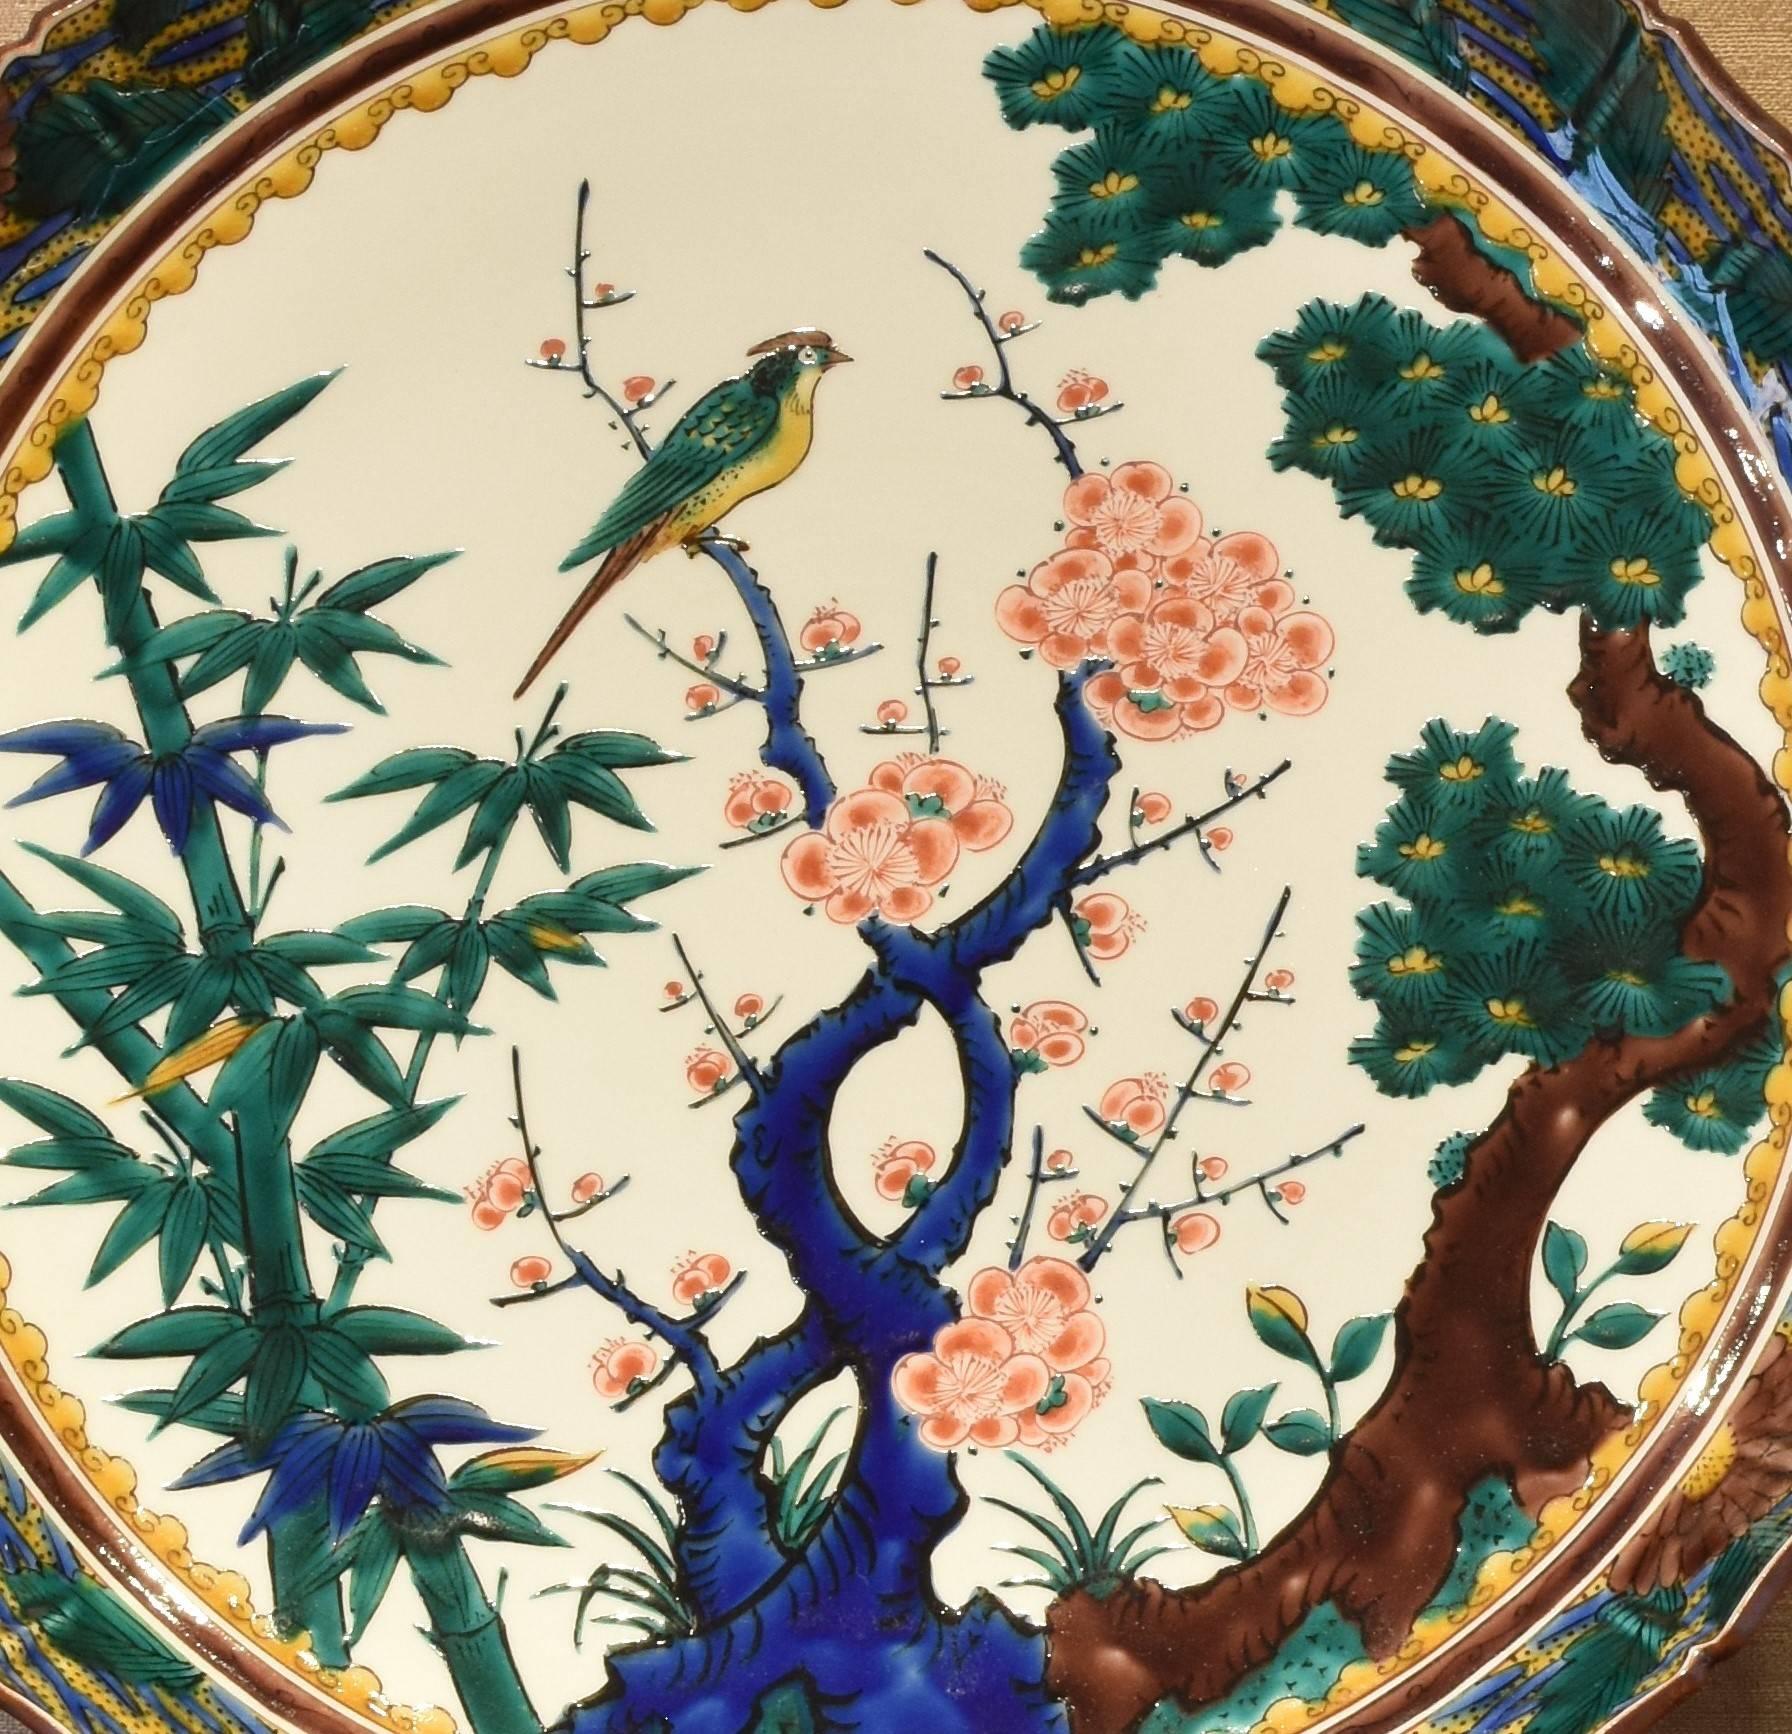 Exquisite Japanese contemporary decorative porcelain charger, hand painted in traditional Kutani colors of blue, red and green with the sho-chiku-bai, or Friends of the Winter motif, a signed work by the third generation master of a Kutani kiln with